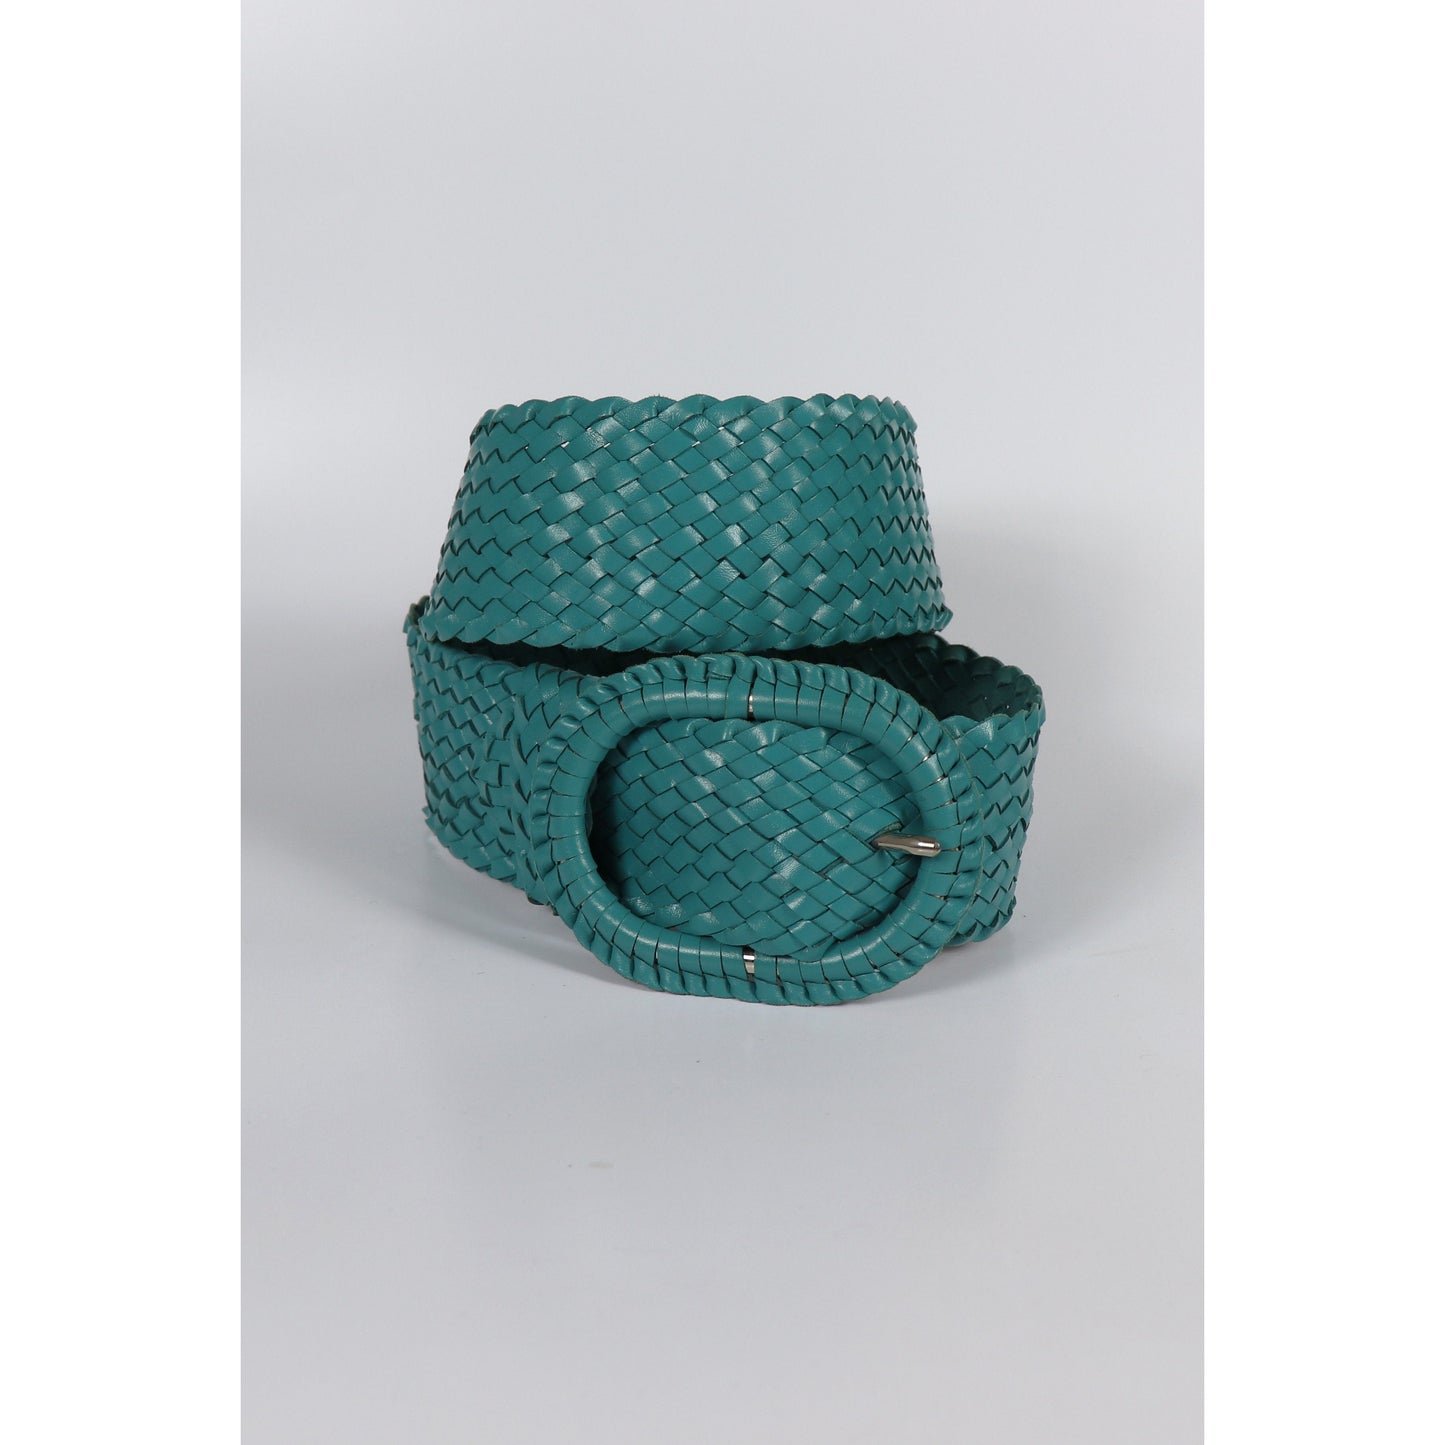 Turquoise woven belt on white.